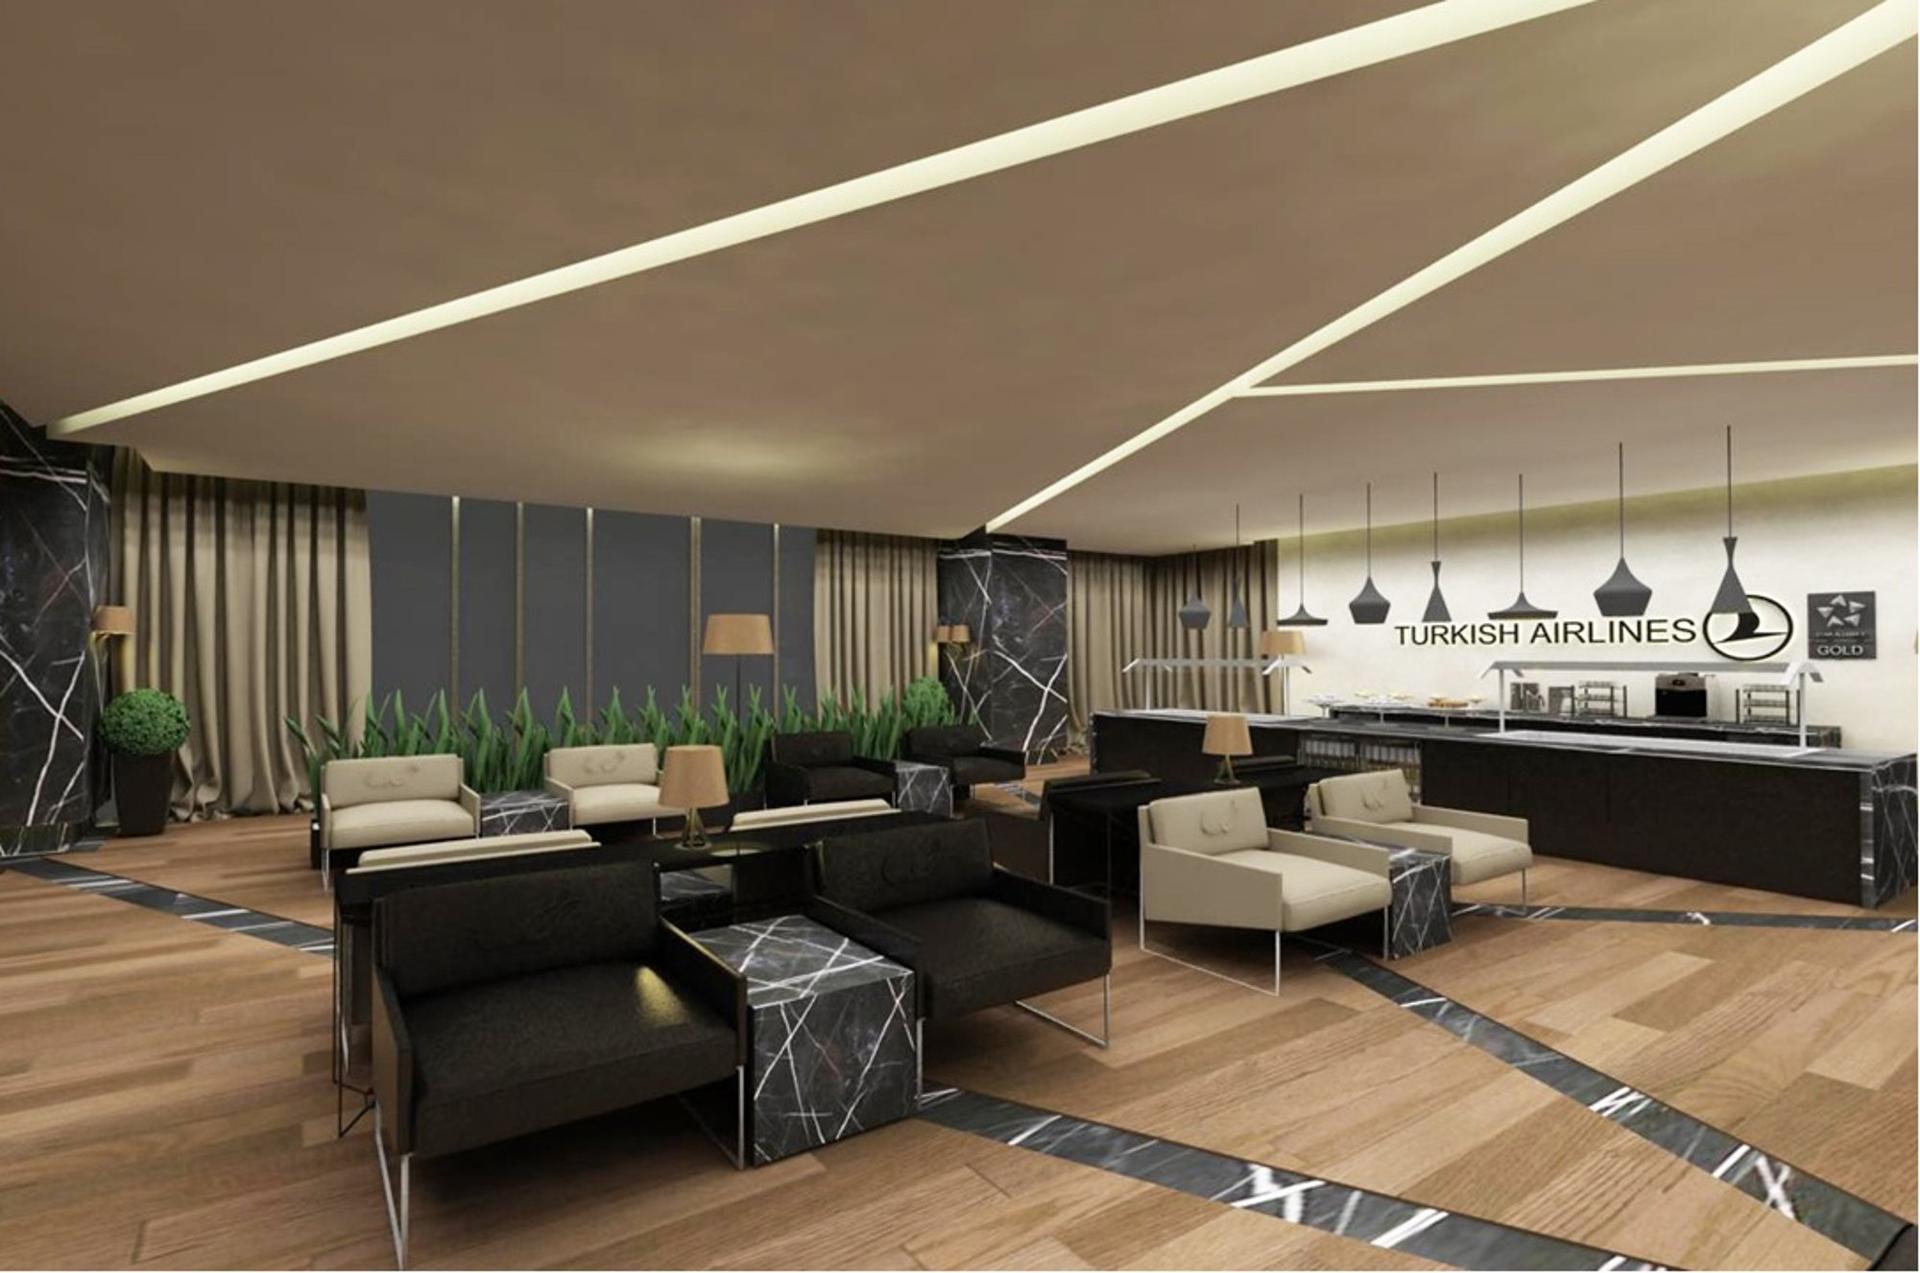 Turkish Airlines CIP Lounge (Business Lounge) image 16 of 27